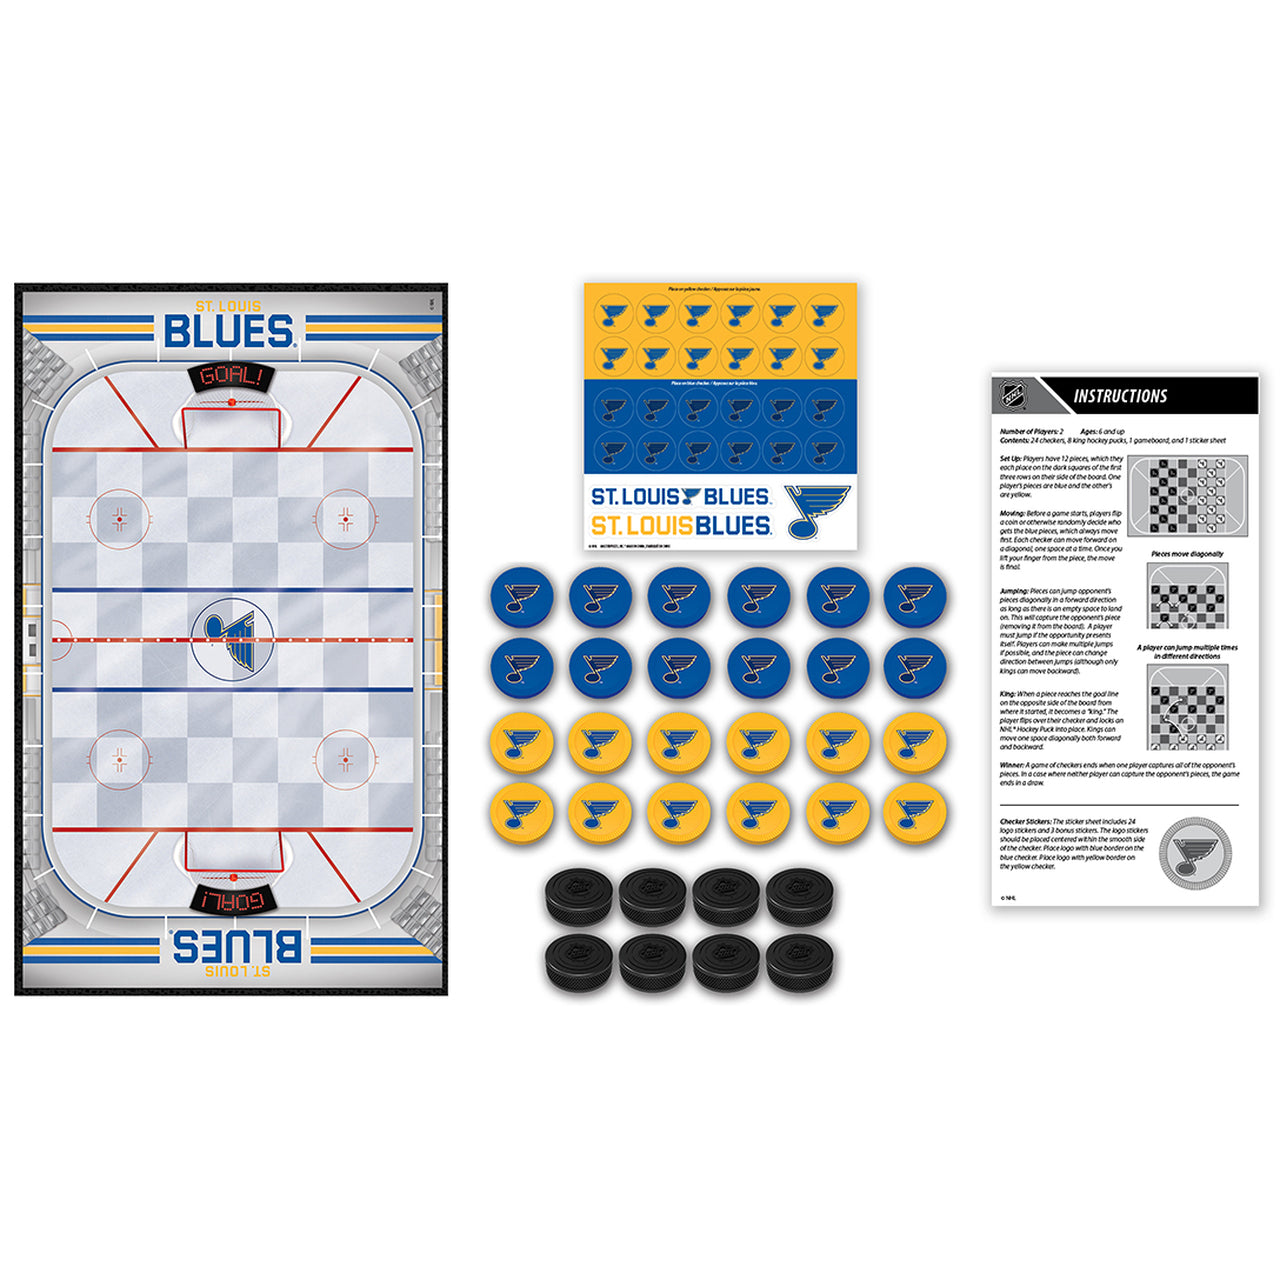 St. Louis Blues Checkers Board Game by Masterpieces